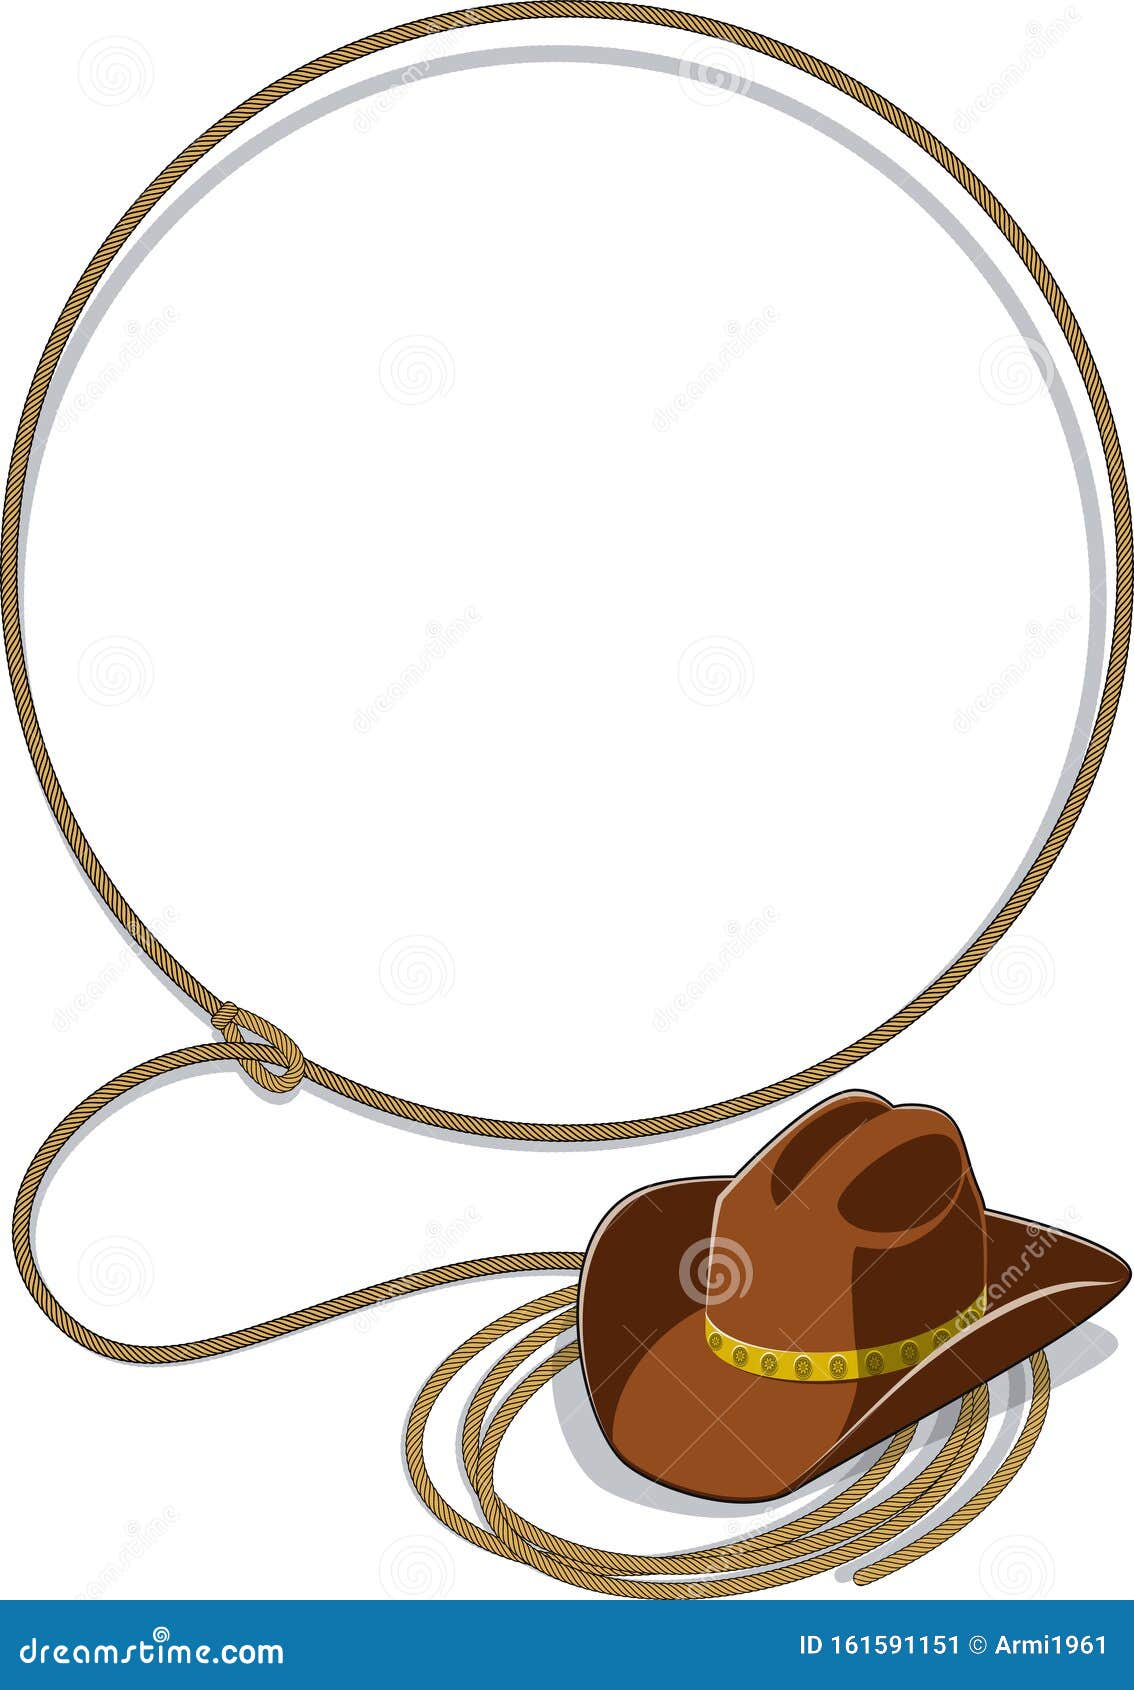 Cowboy Stetson Hat and Lasso Rope Background Stock Vector